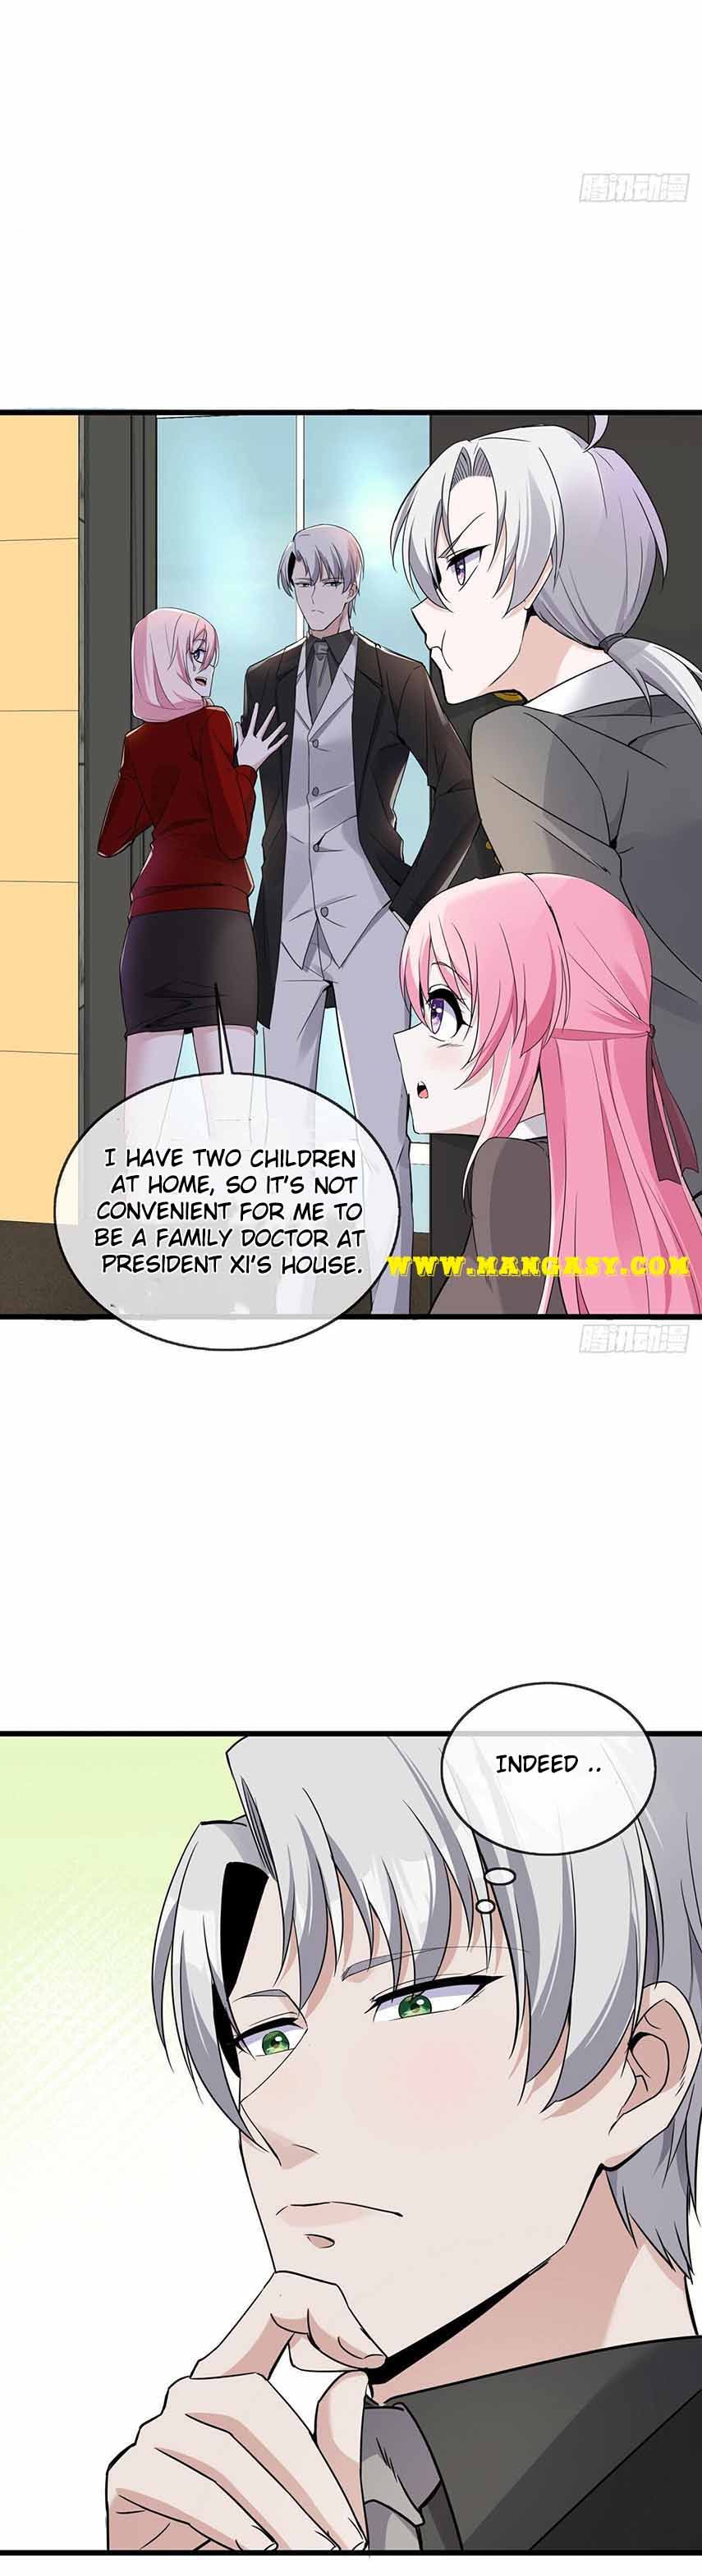 Daddy President Is Too Hard To Deal With - chapter 37 - #6